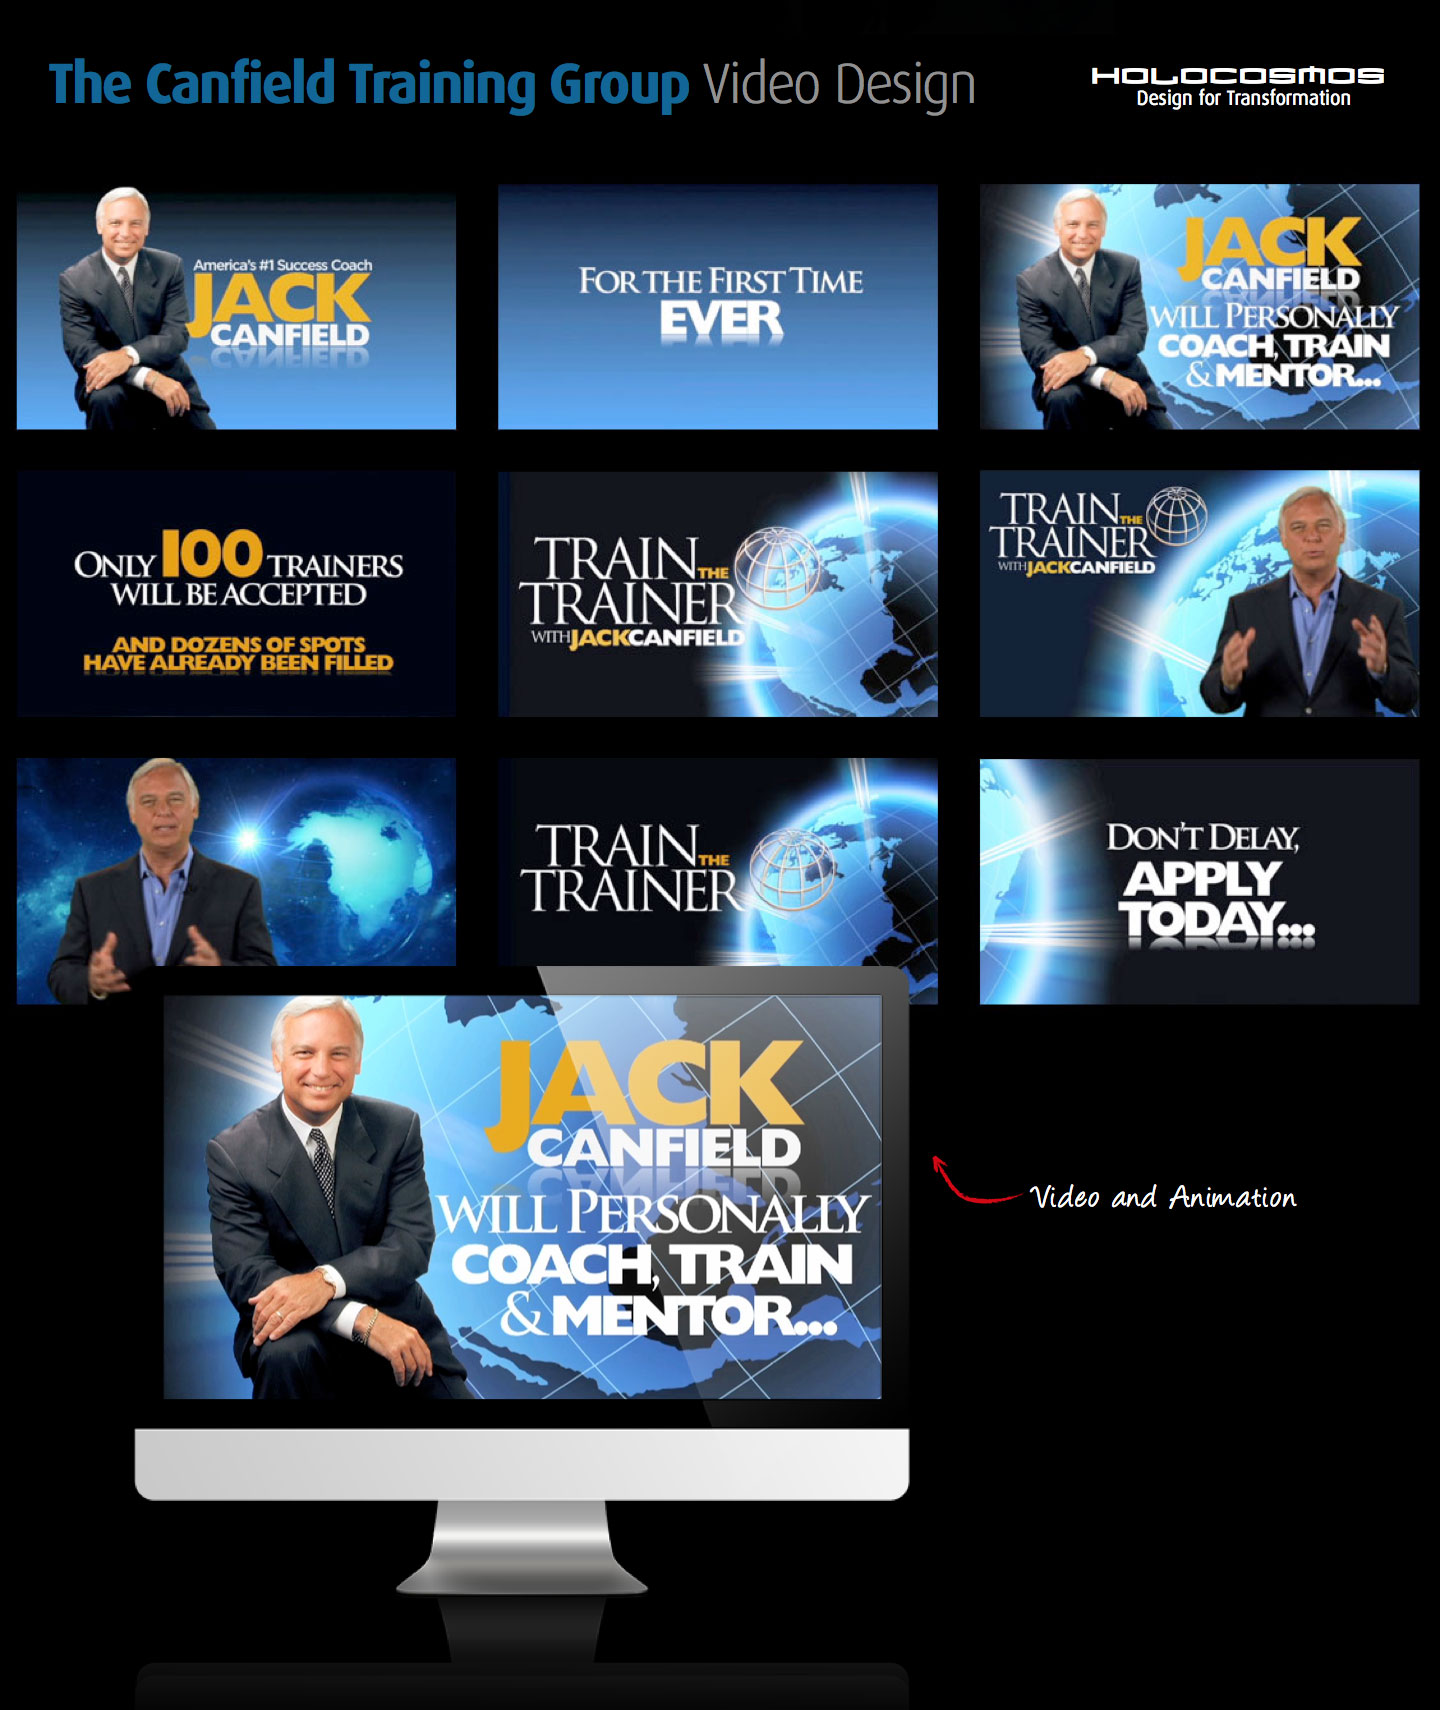 Jack Canfield Corporate Branding by HoloCosmos